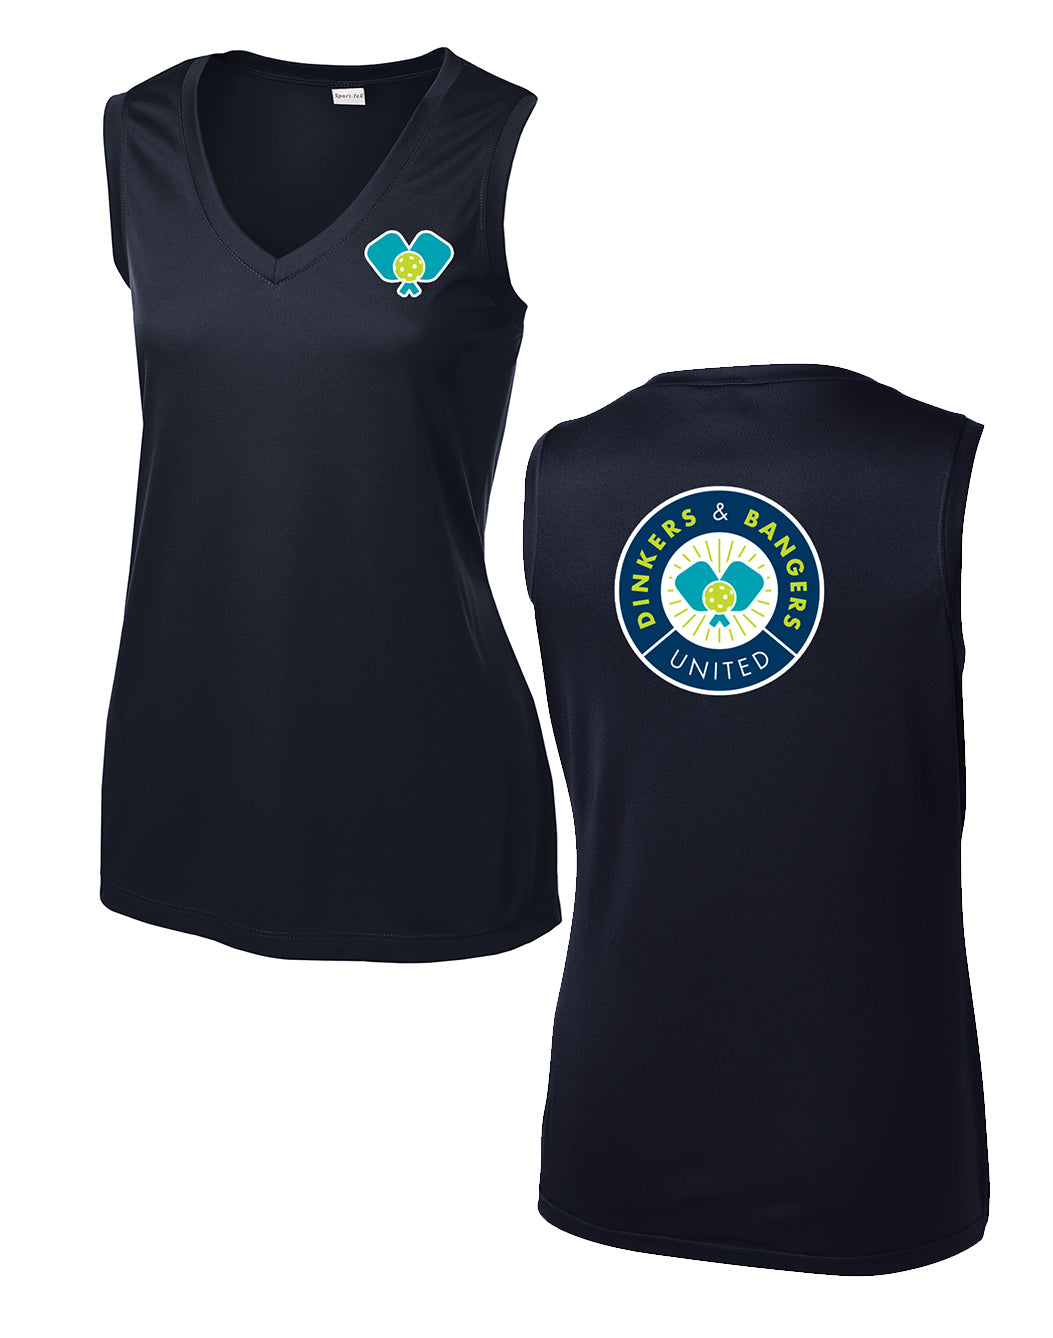 Dinkers & Bangers United™ - Womens Performance Tank - 2 Sided